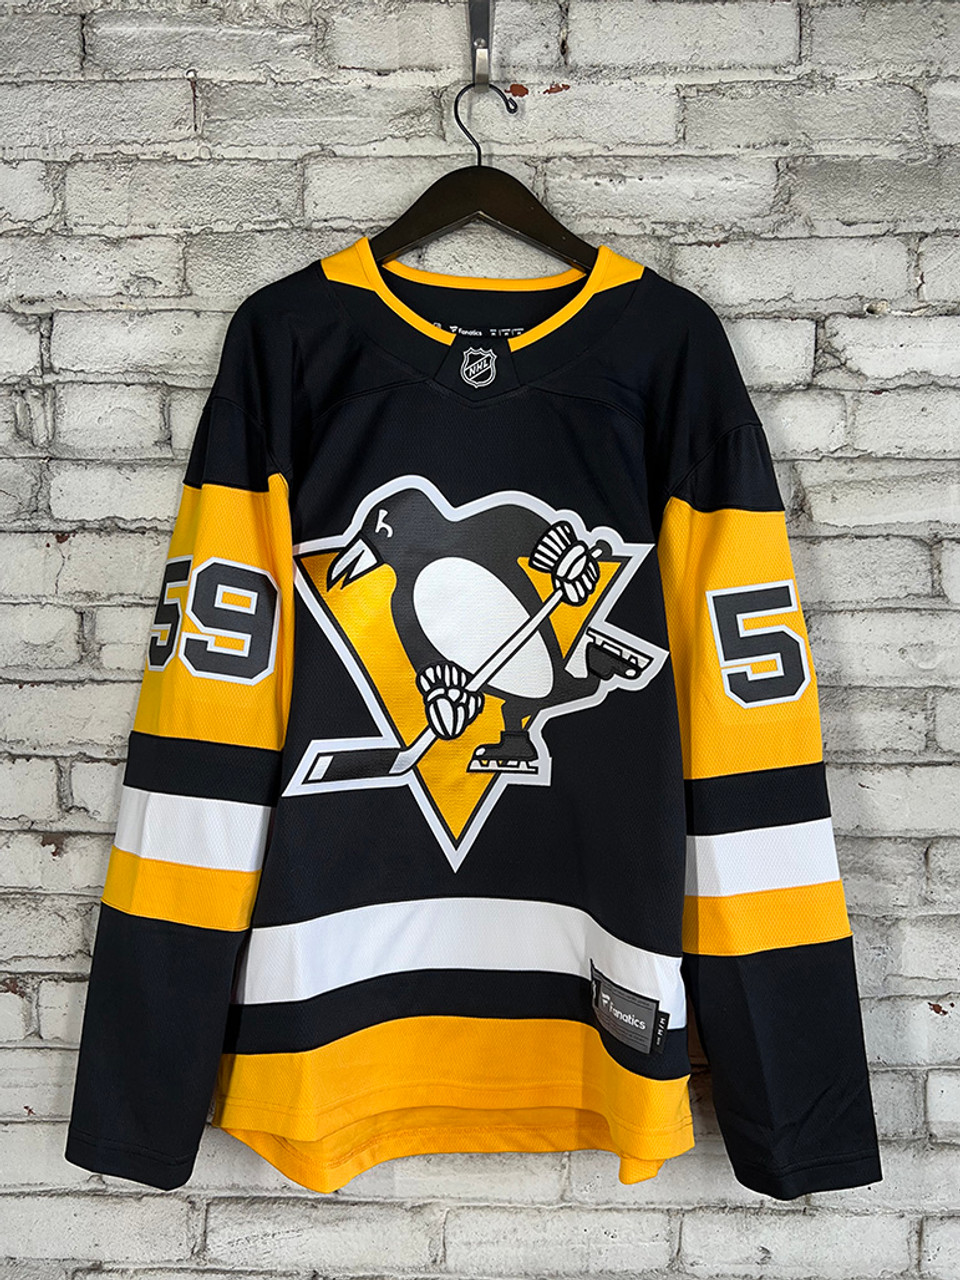 58 Letang - Adidas NHL Embroidered Penguins Jersey with Strap